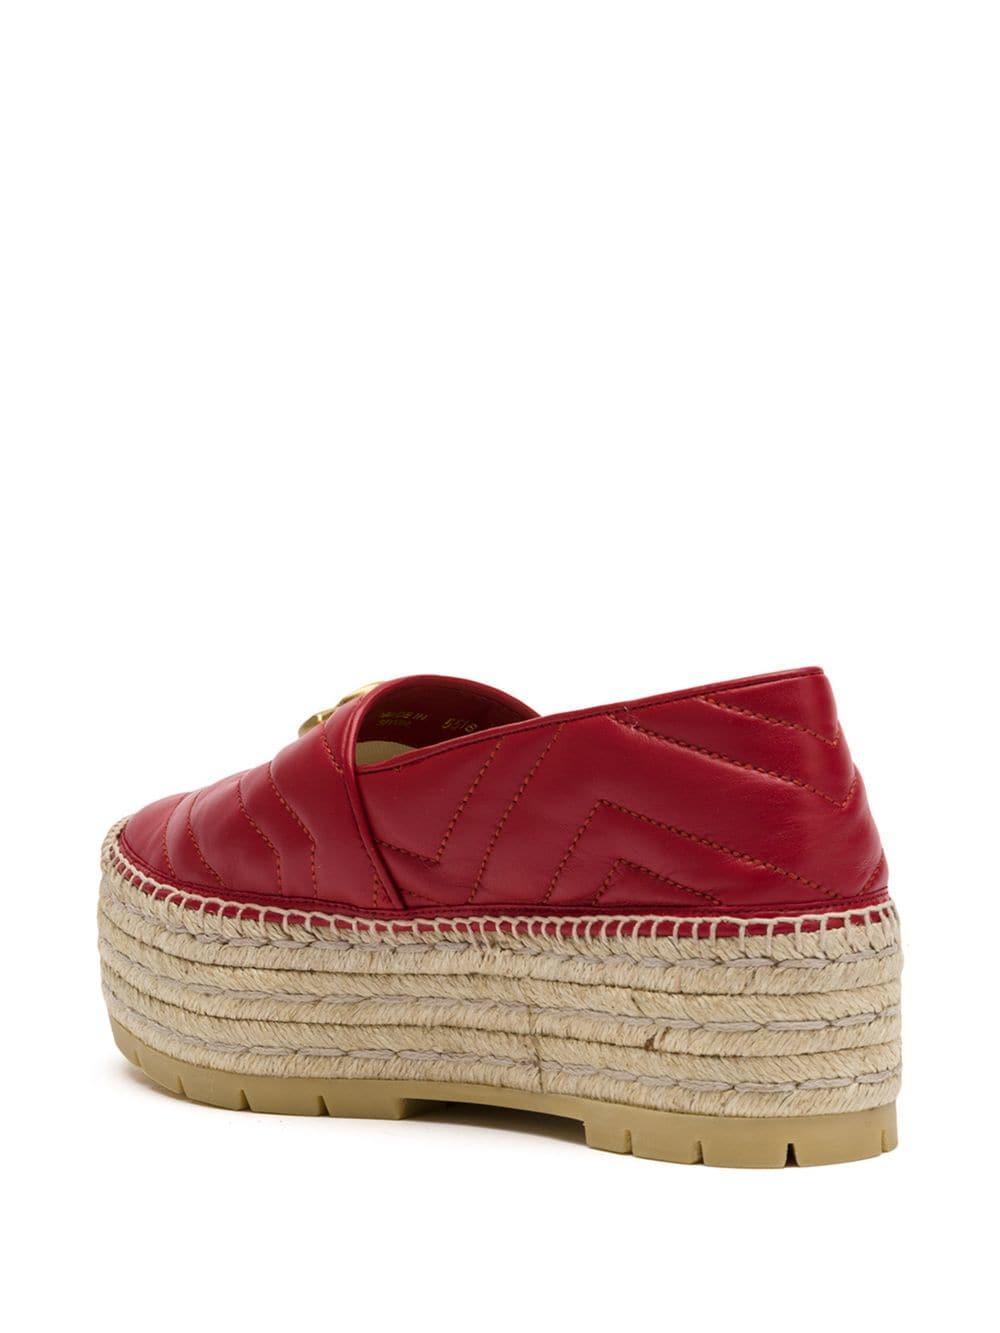 Gucci Double G Leather Espadrilles in Red | Lyst